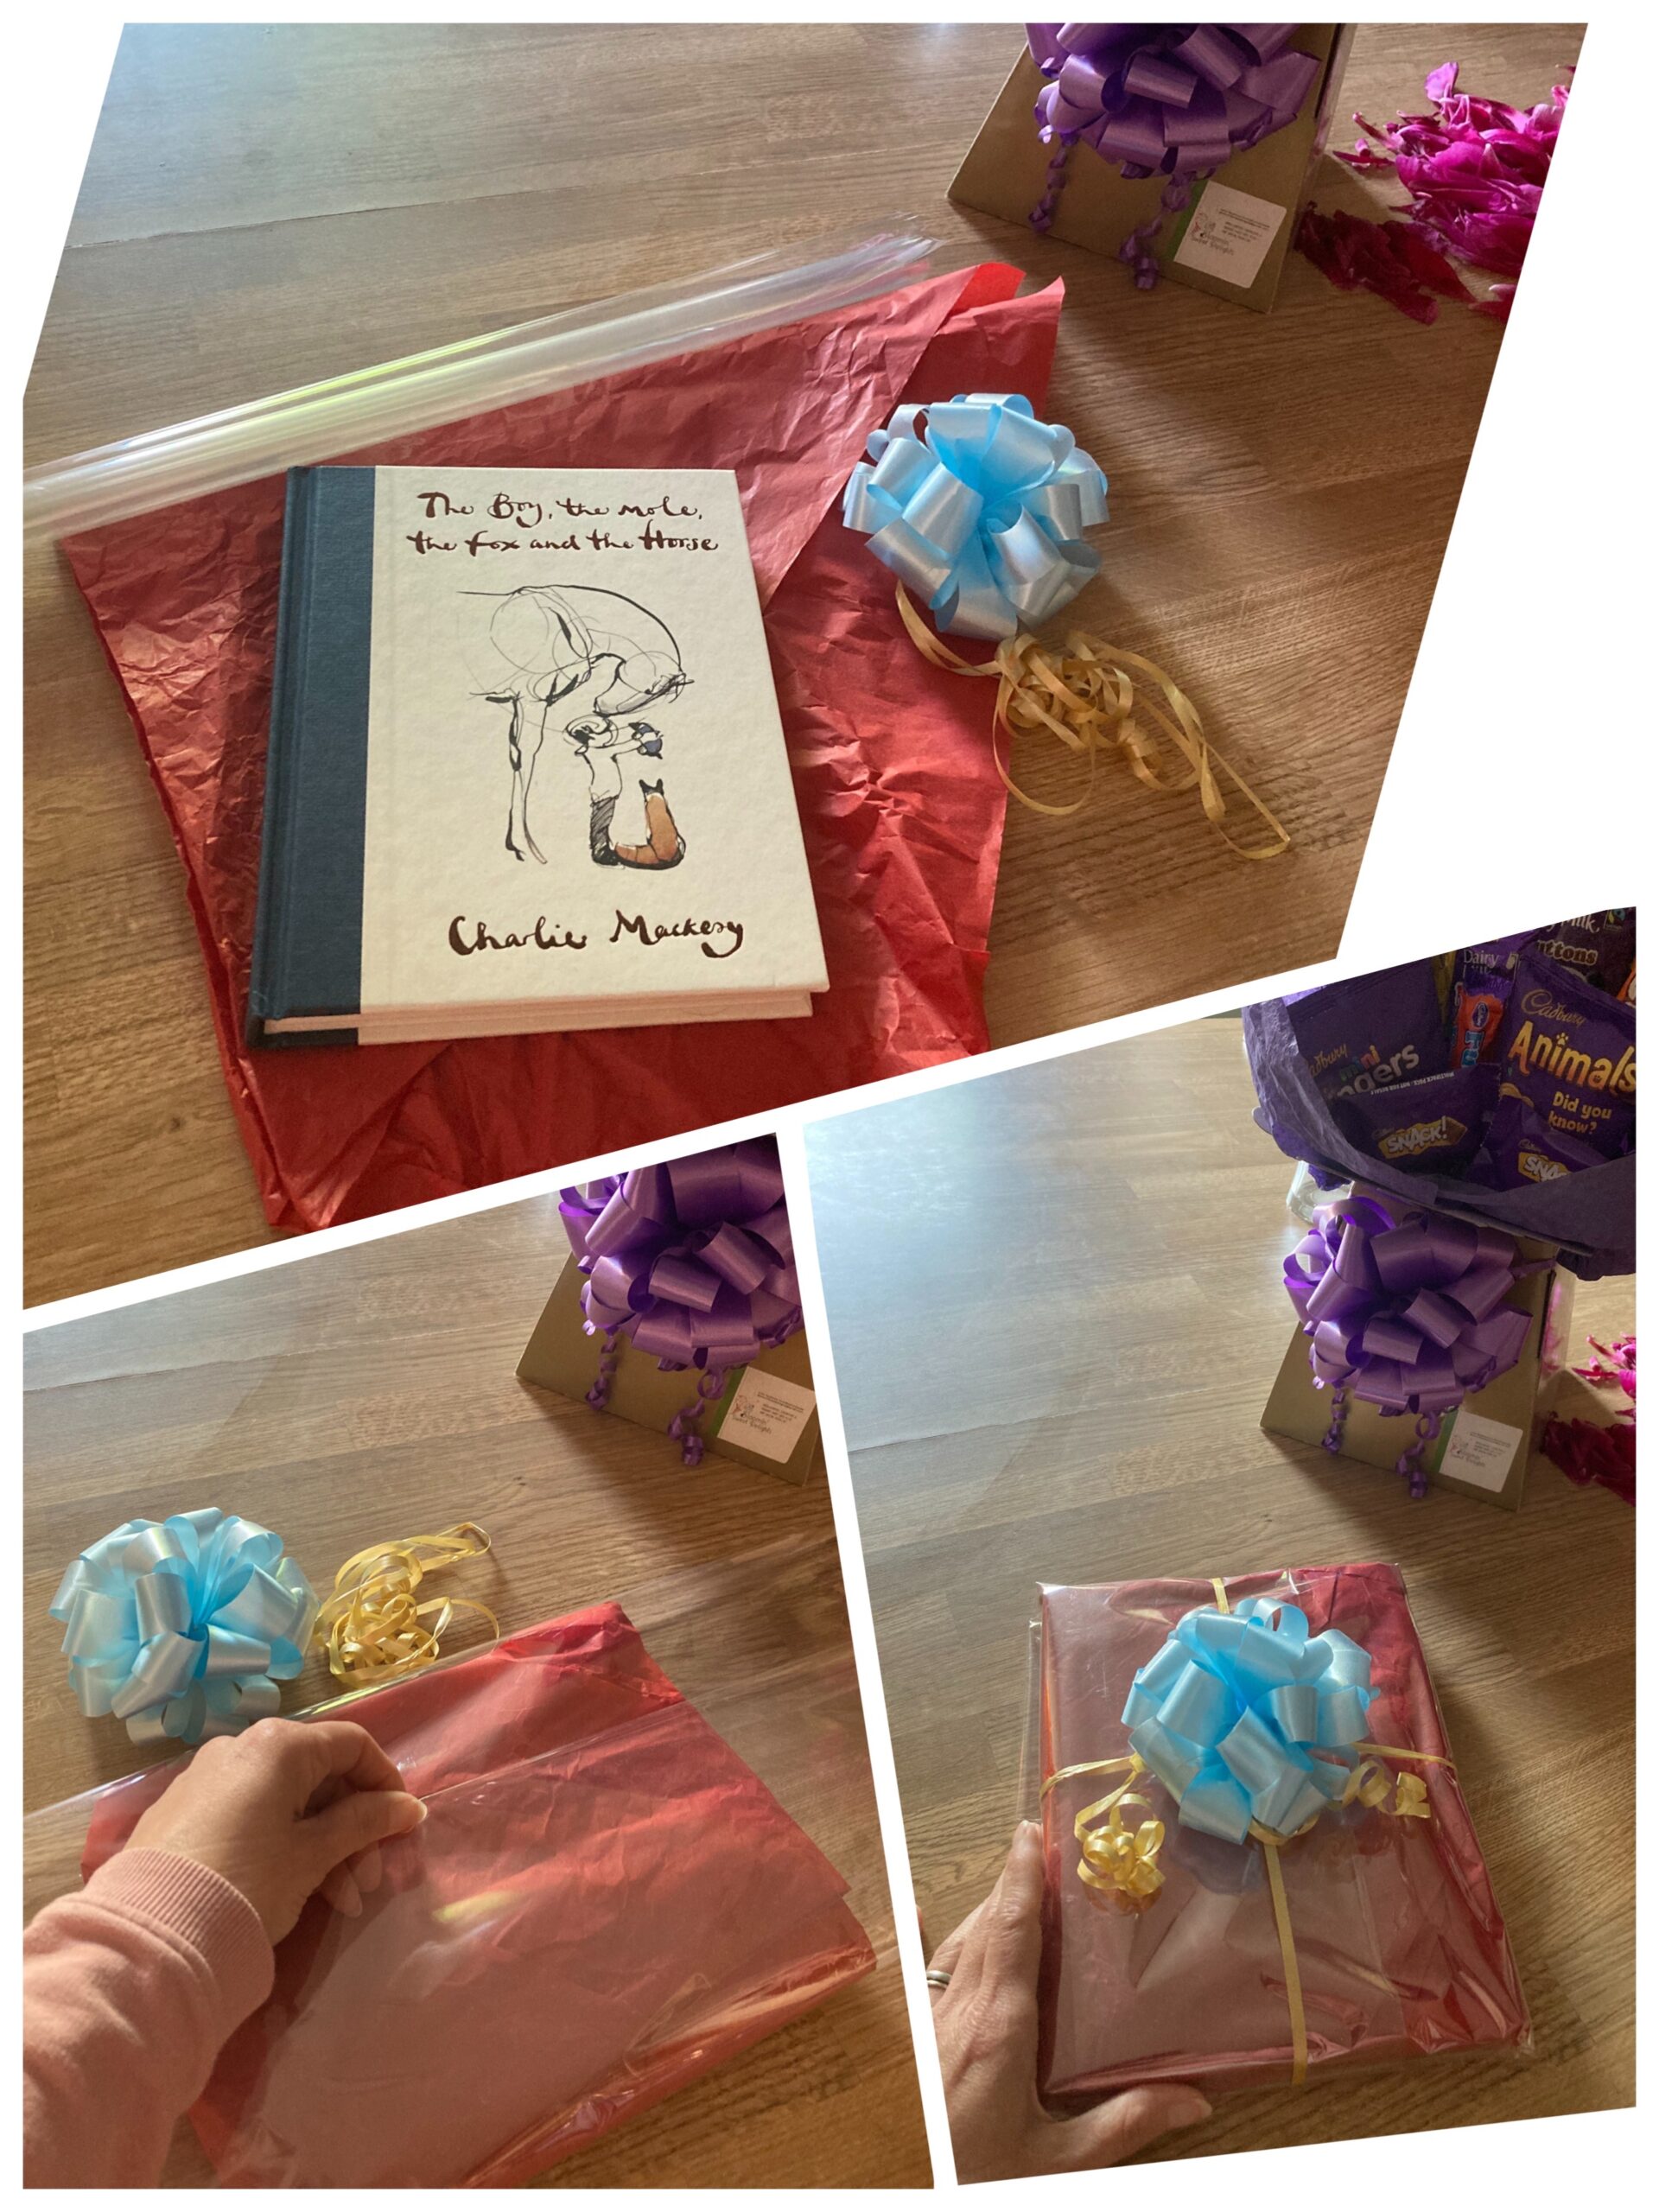 Collage of images of gift wrapping a book using tissue paper, cellophane and polypropylene handmade bow